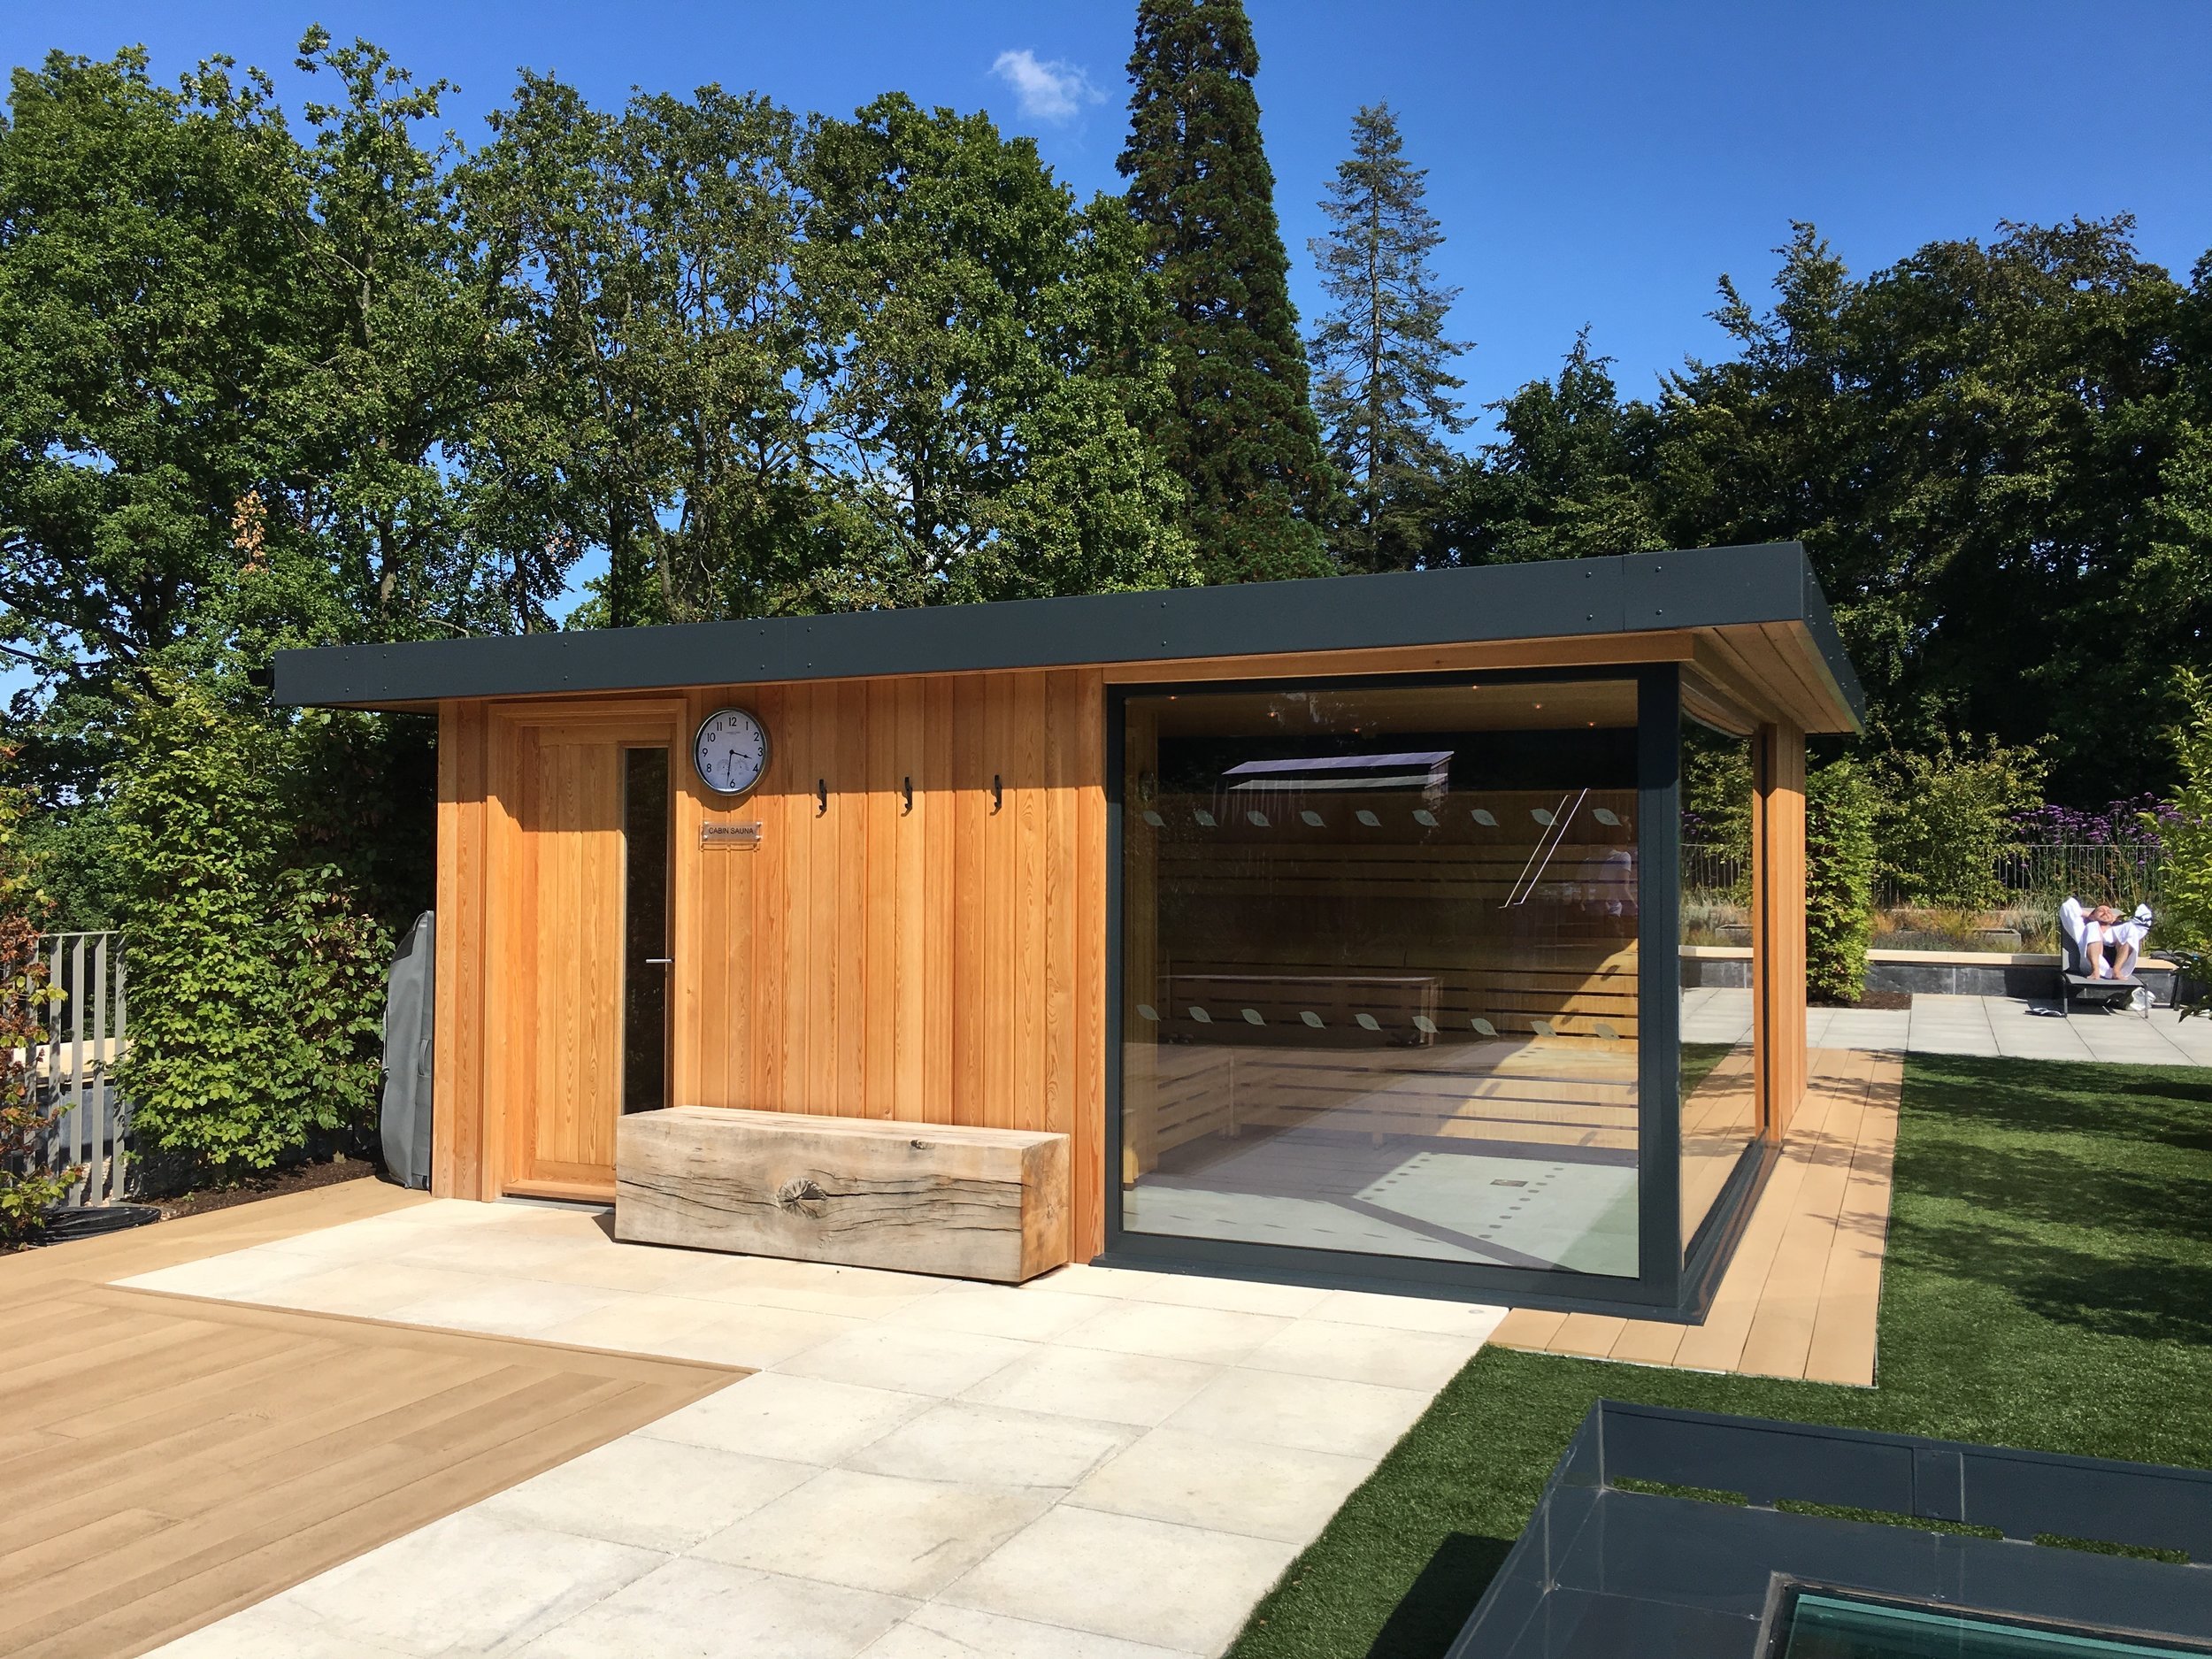  In the roof garden at Rudding Park's new spa, along with a selection of seating areas, there's a cabin sauna  